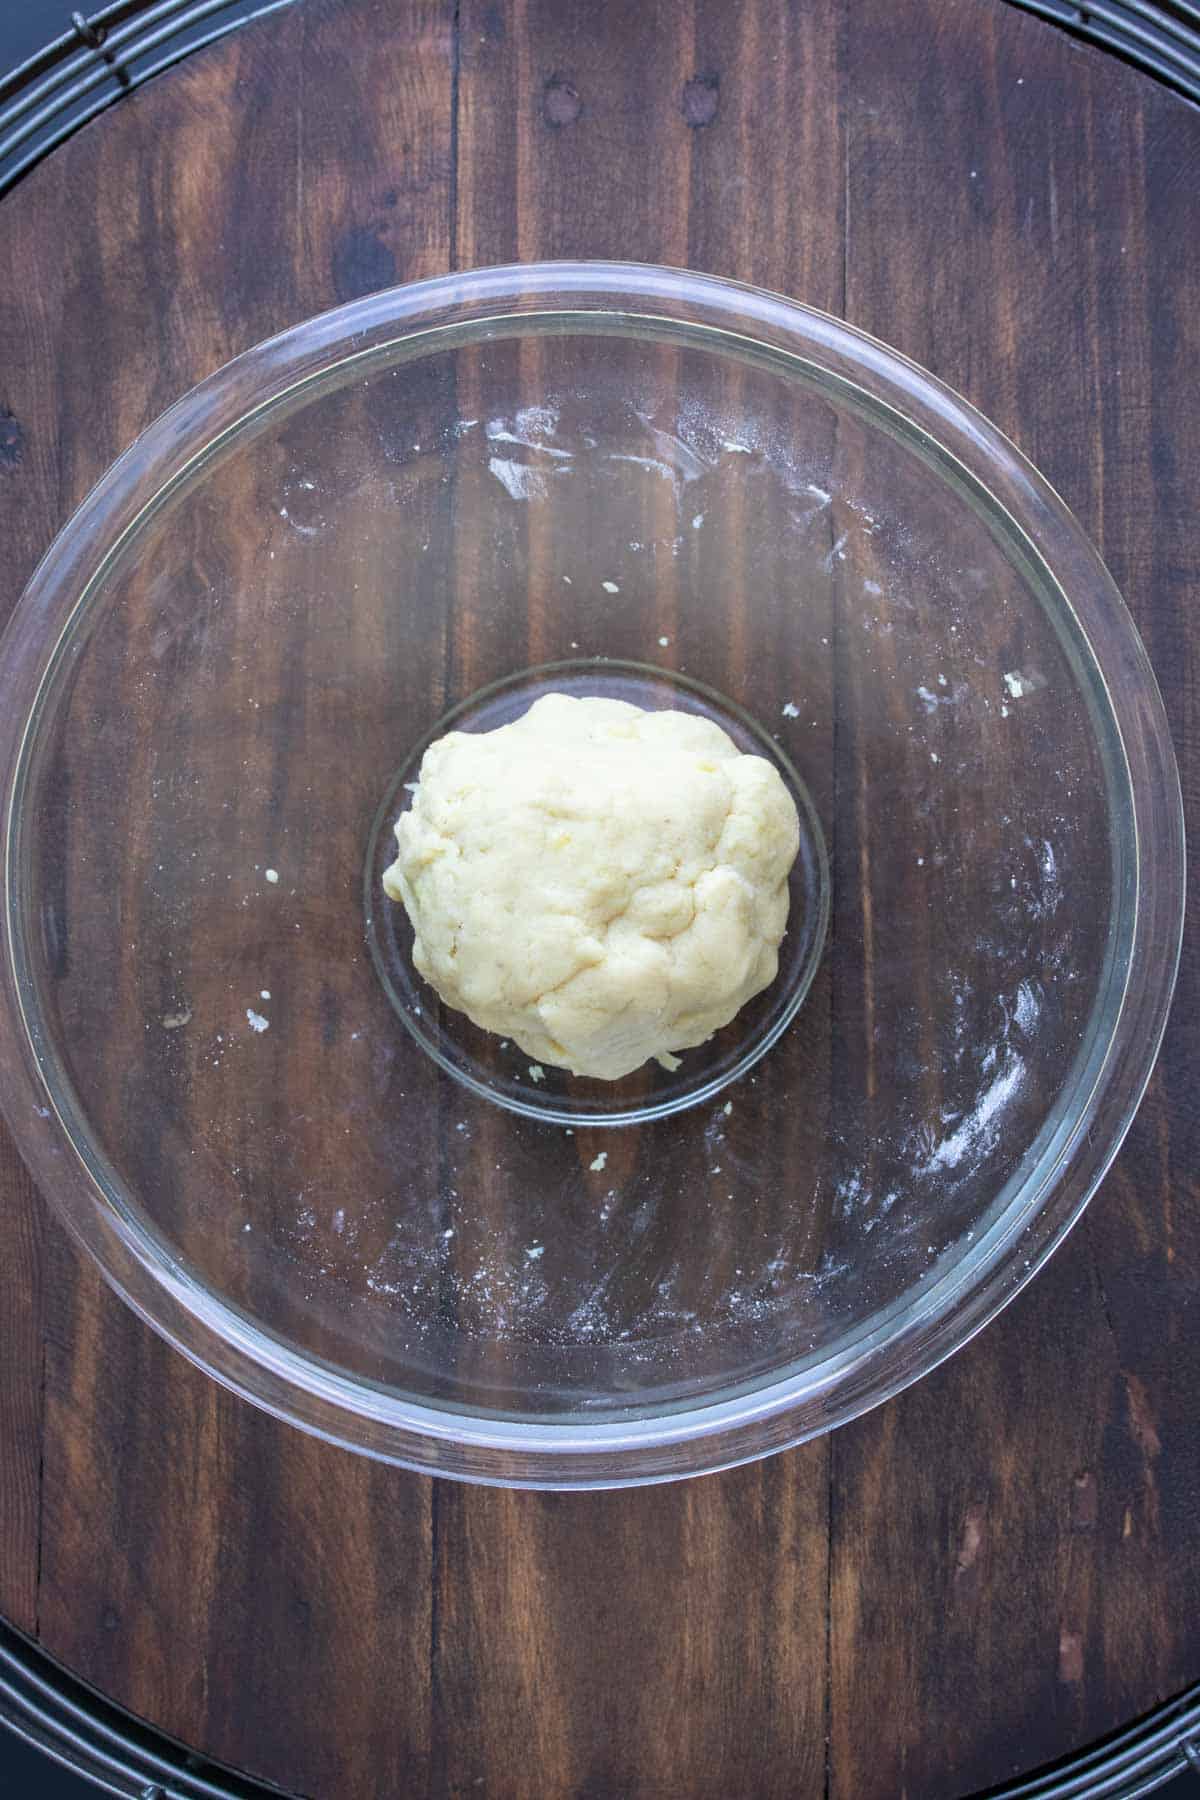 Glass bowl on a wooden surface with a ball of dough inside